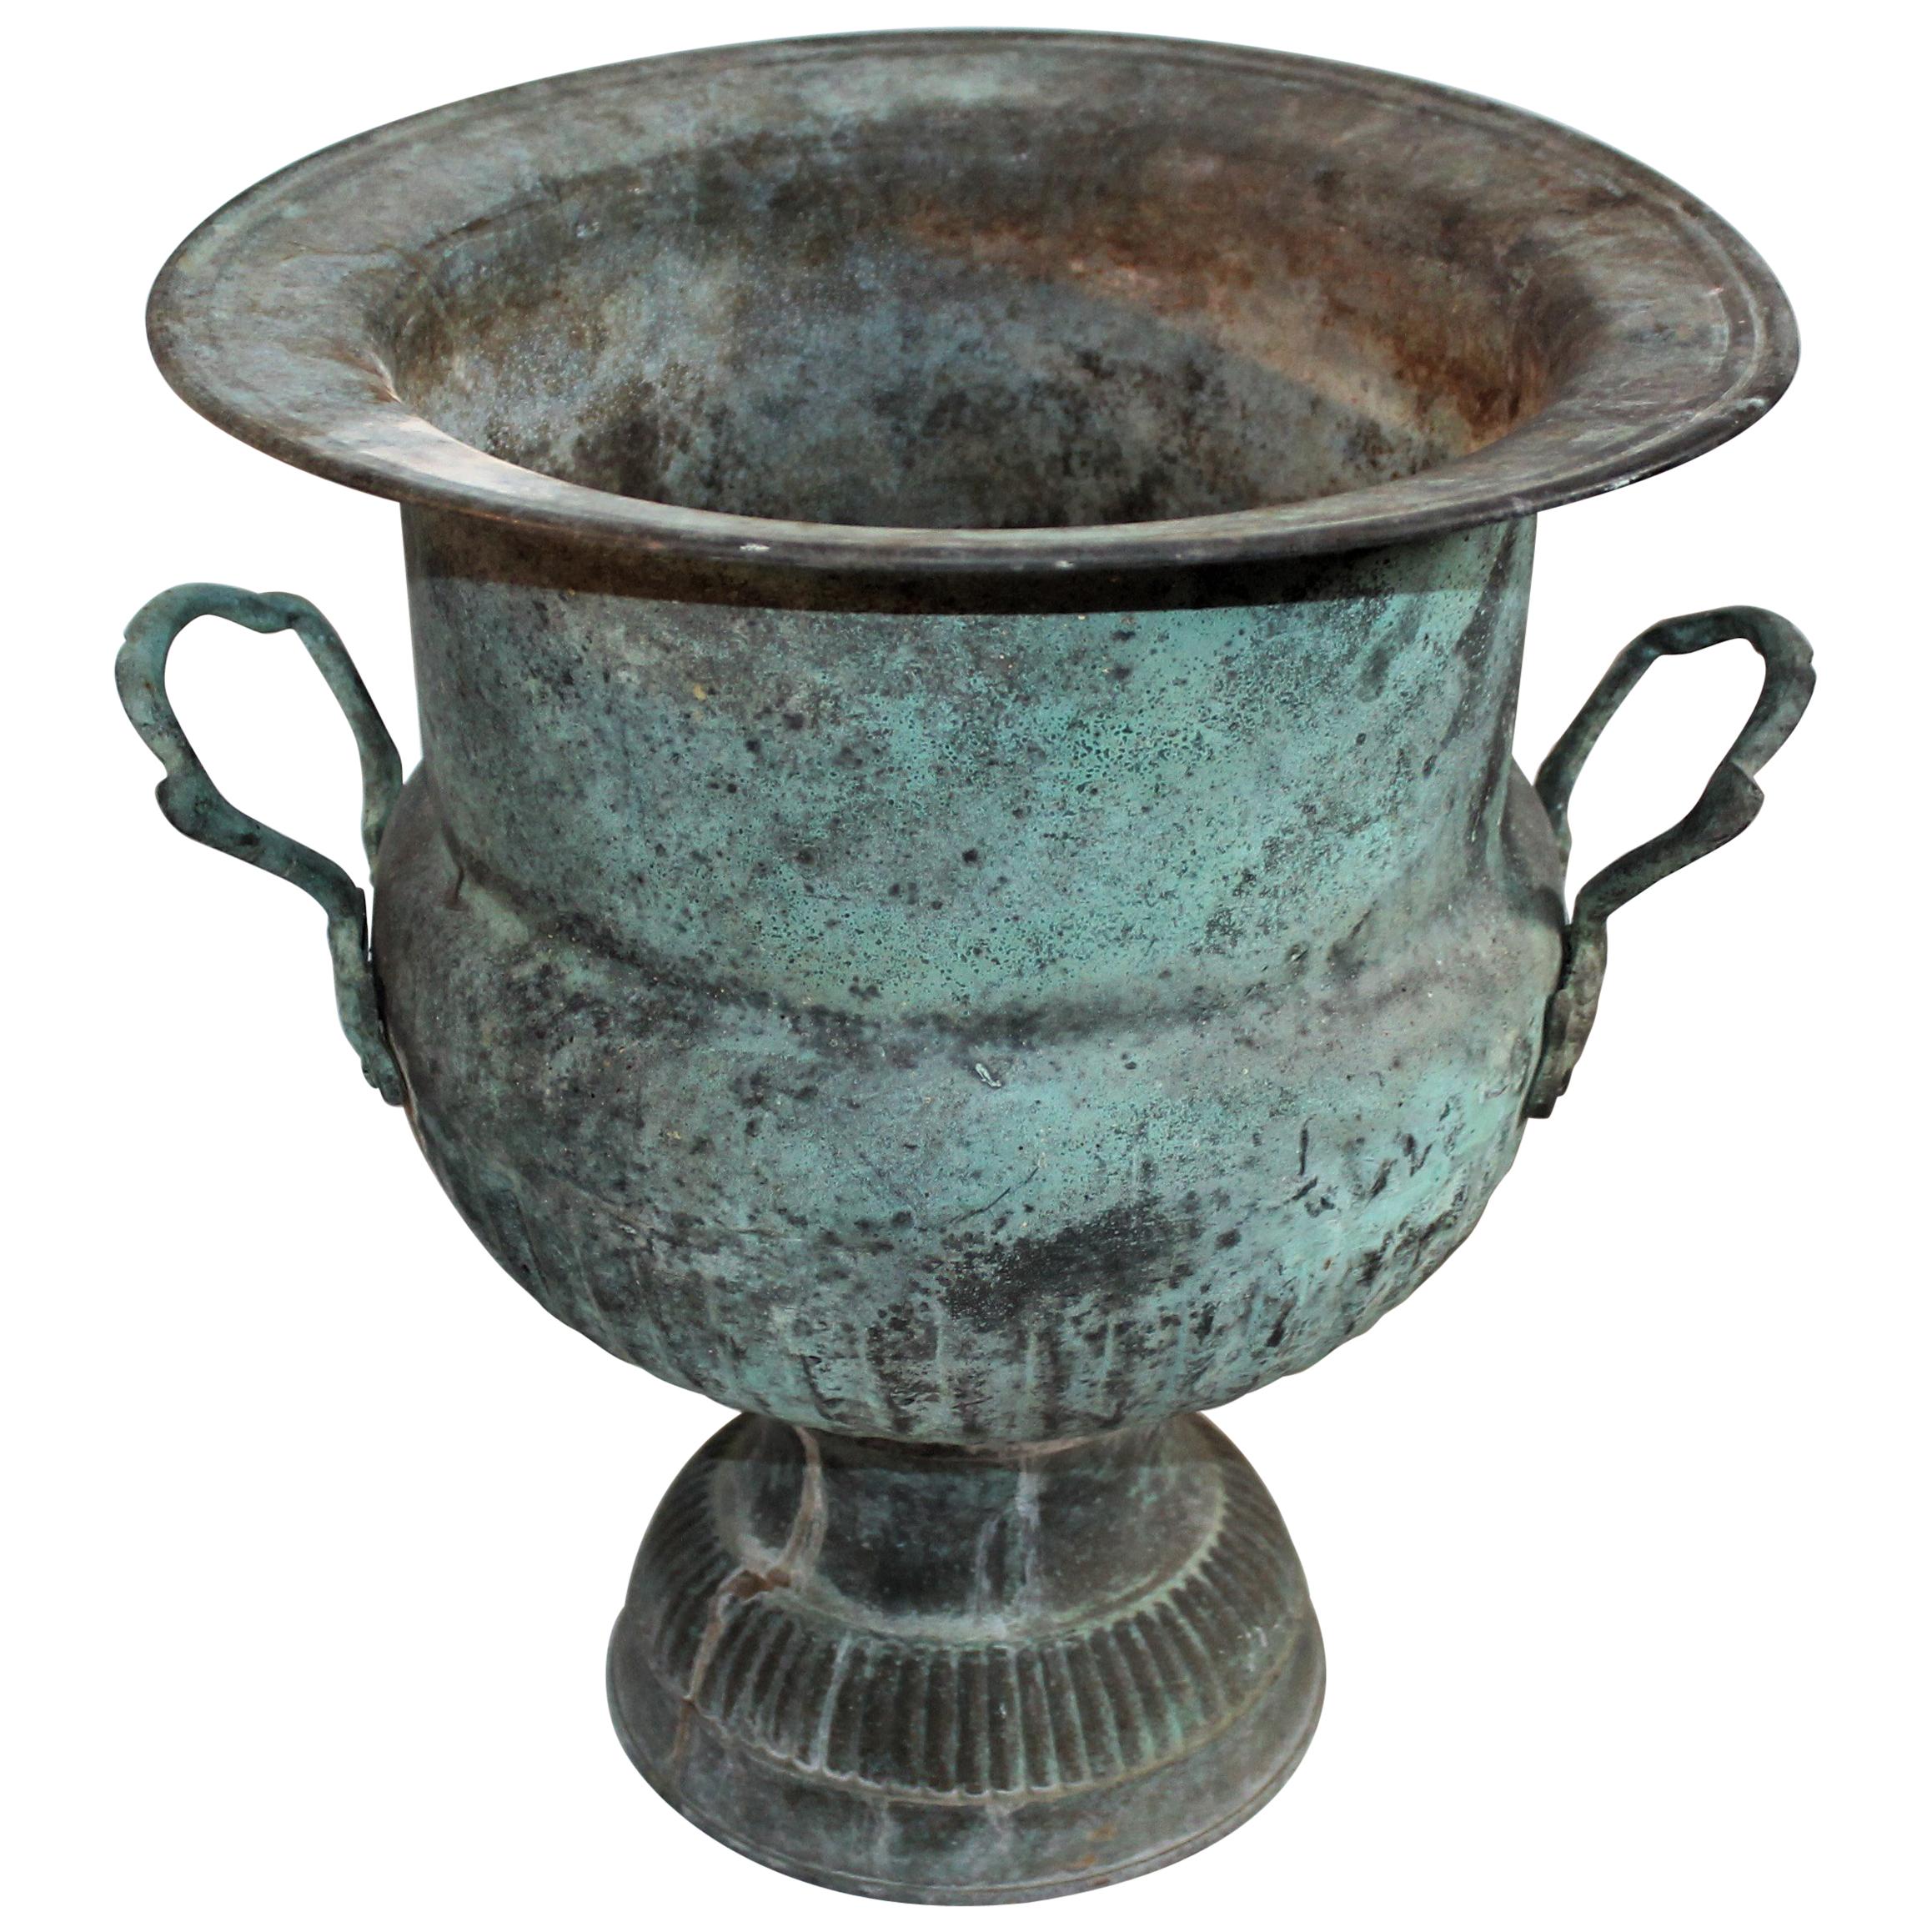 19th Century Urn with Handles in Patinated Copper Surface